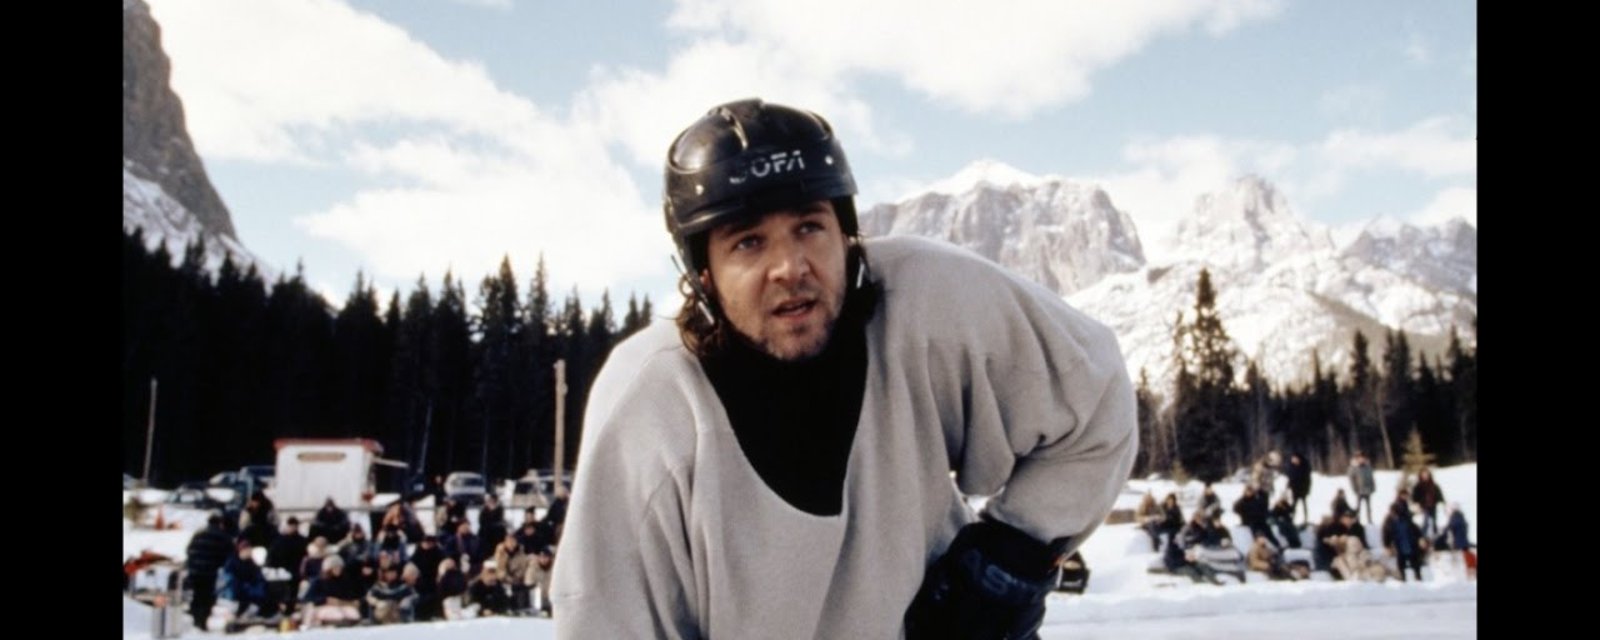 Throwback: Russell Crowe lays out Rangers player in Mystery Alaska